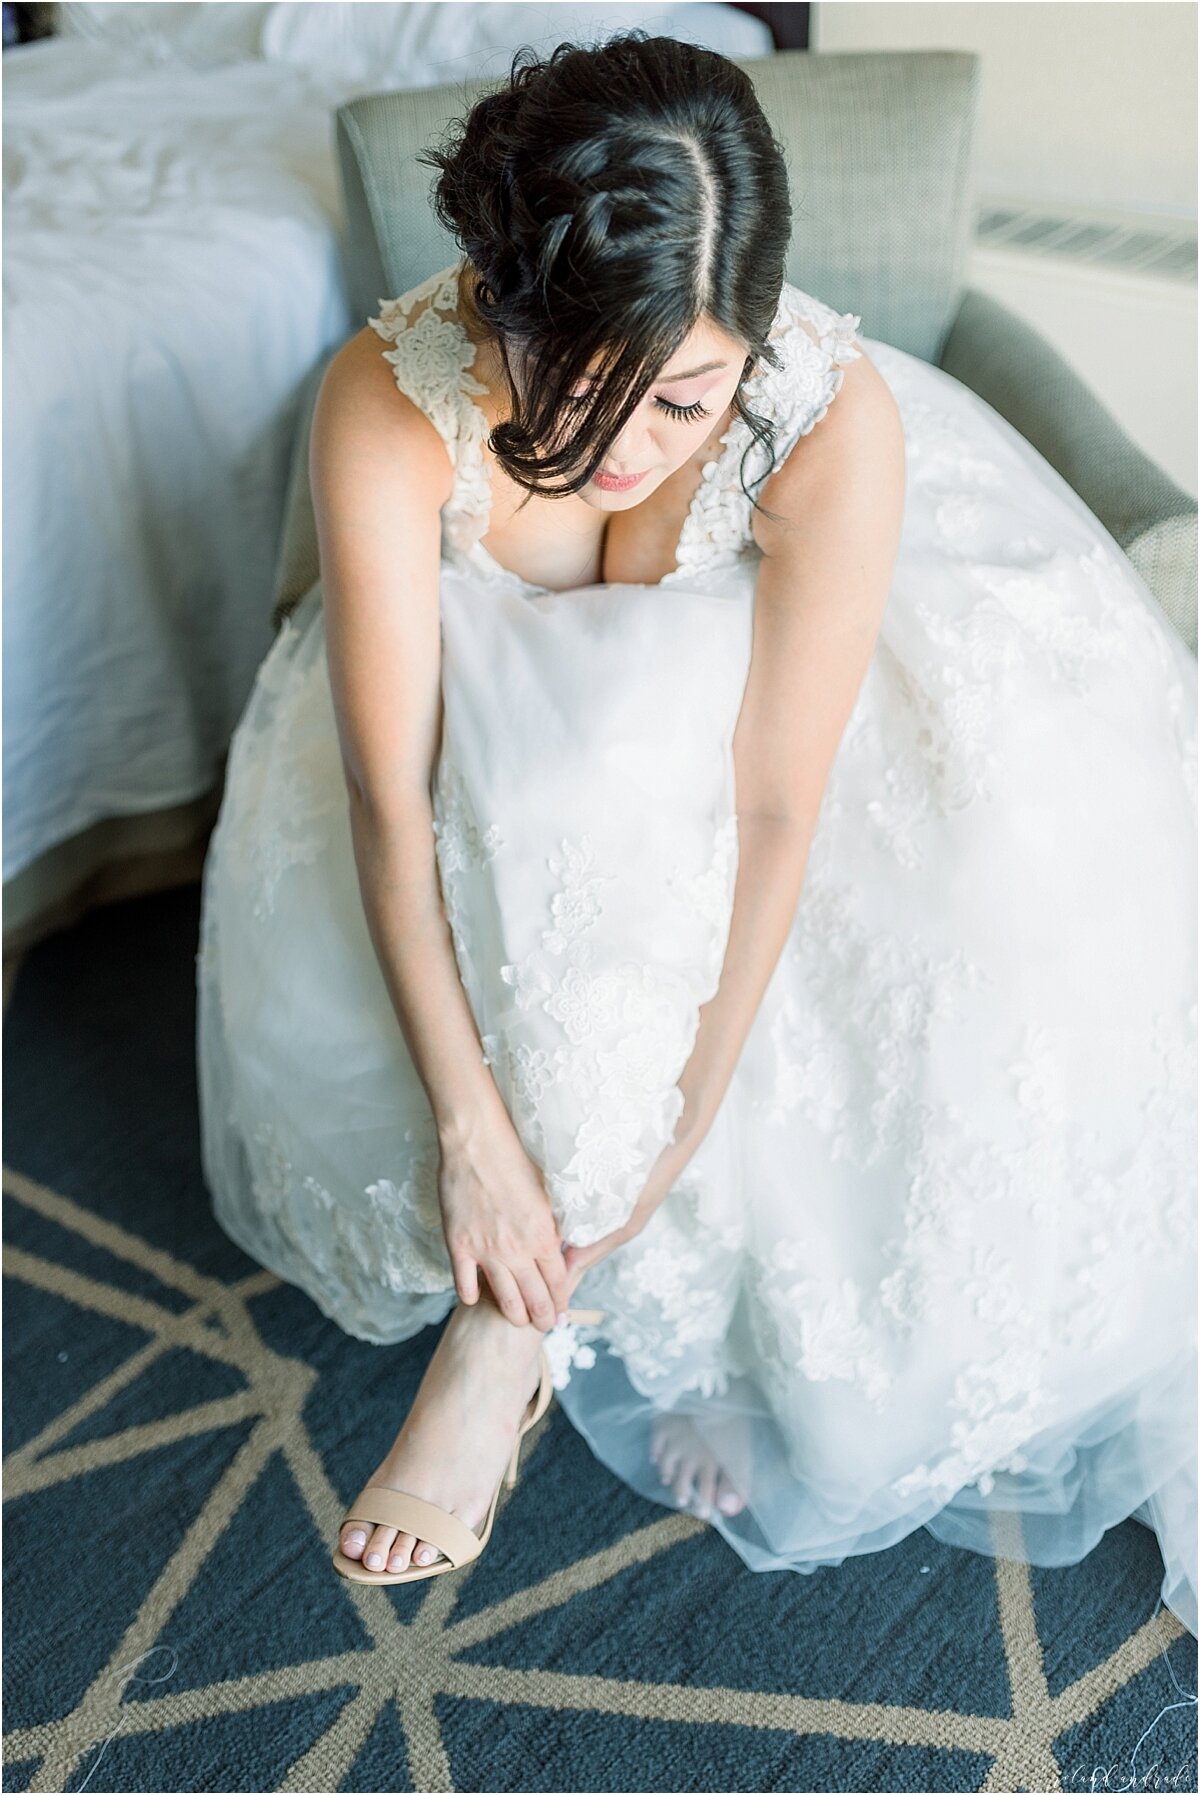 Light and Airy Wedding Photographer Chicago, Furama Chinese Wedding Photographer + Chicago Latino Photography + Naperville Wedding Photographer + Chicago Engagement Photographer + Best Photographer In Chicago_0013.jpg